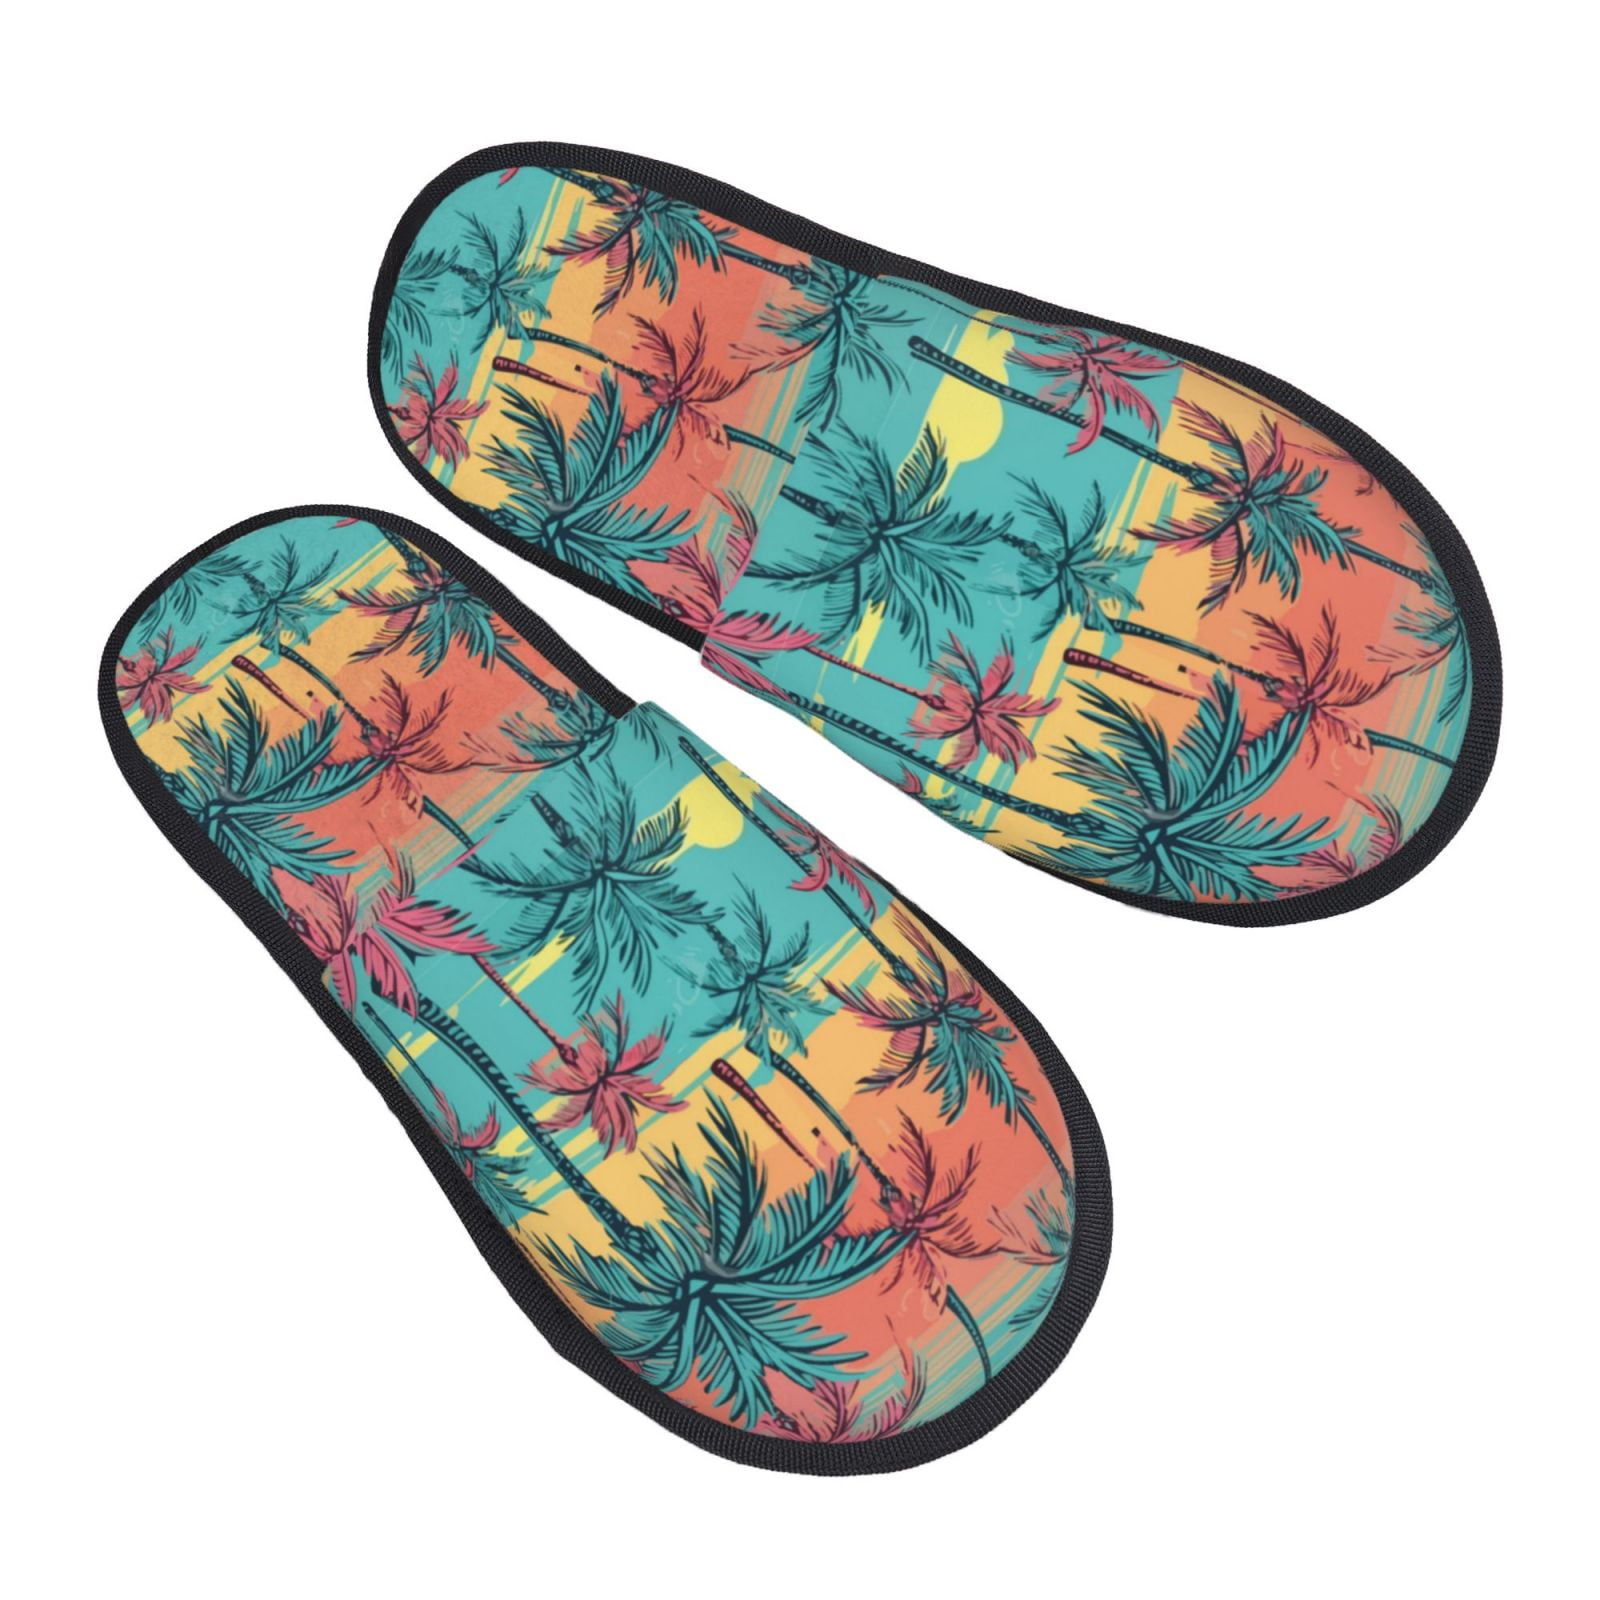 Bingfone Hawaii Palms House Slippers for Women Men with Soft Rubber ...